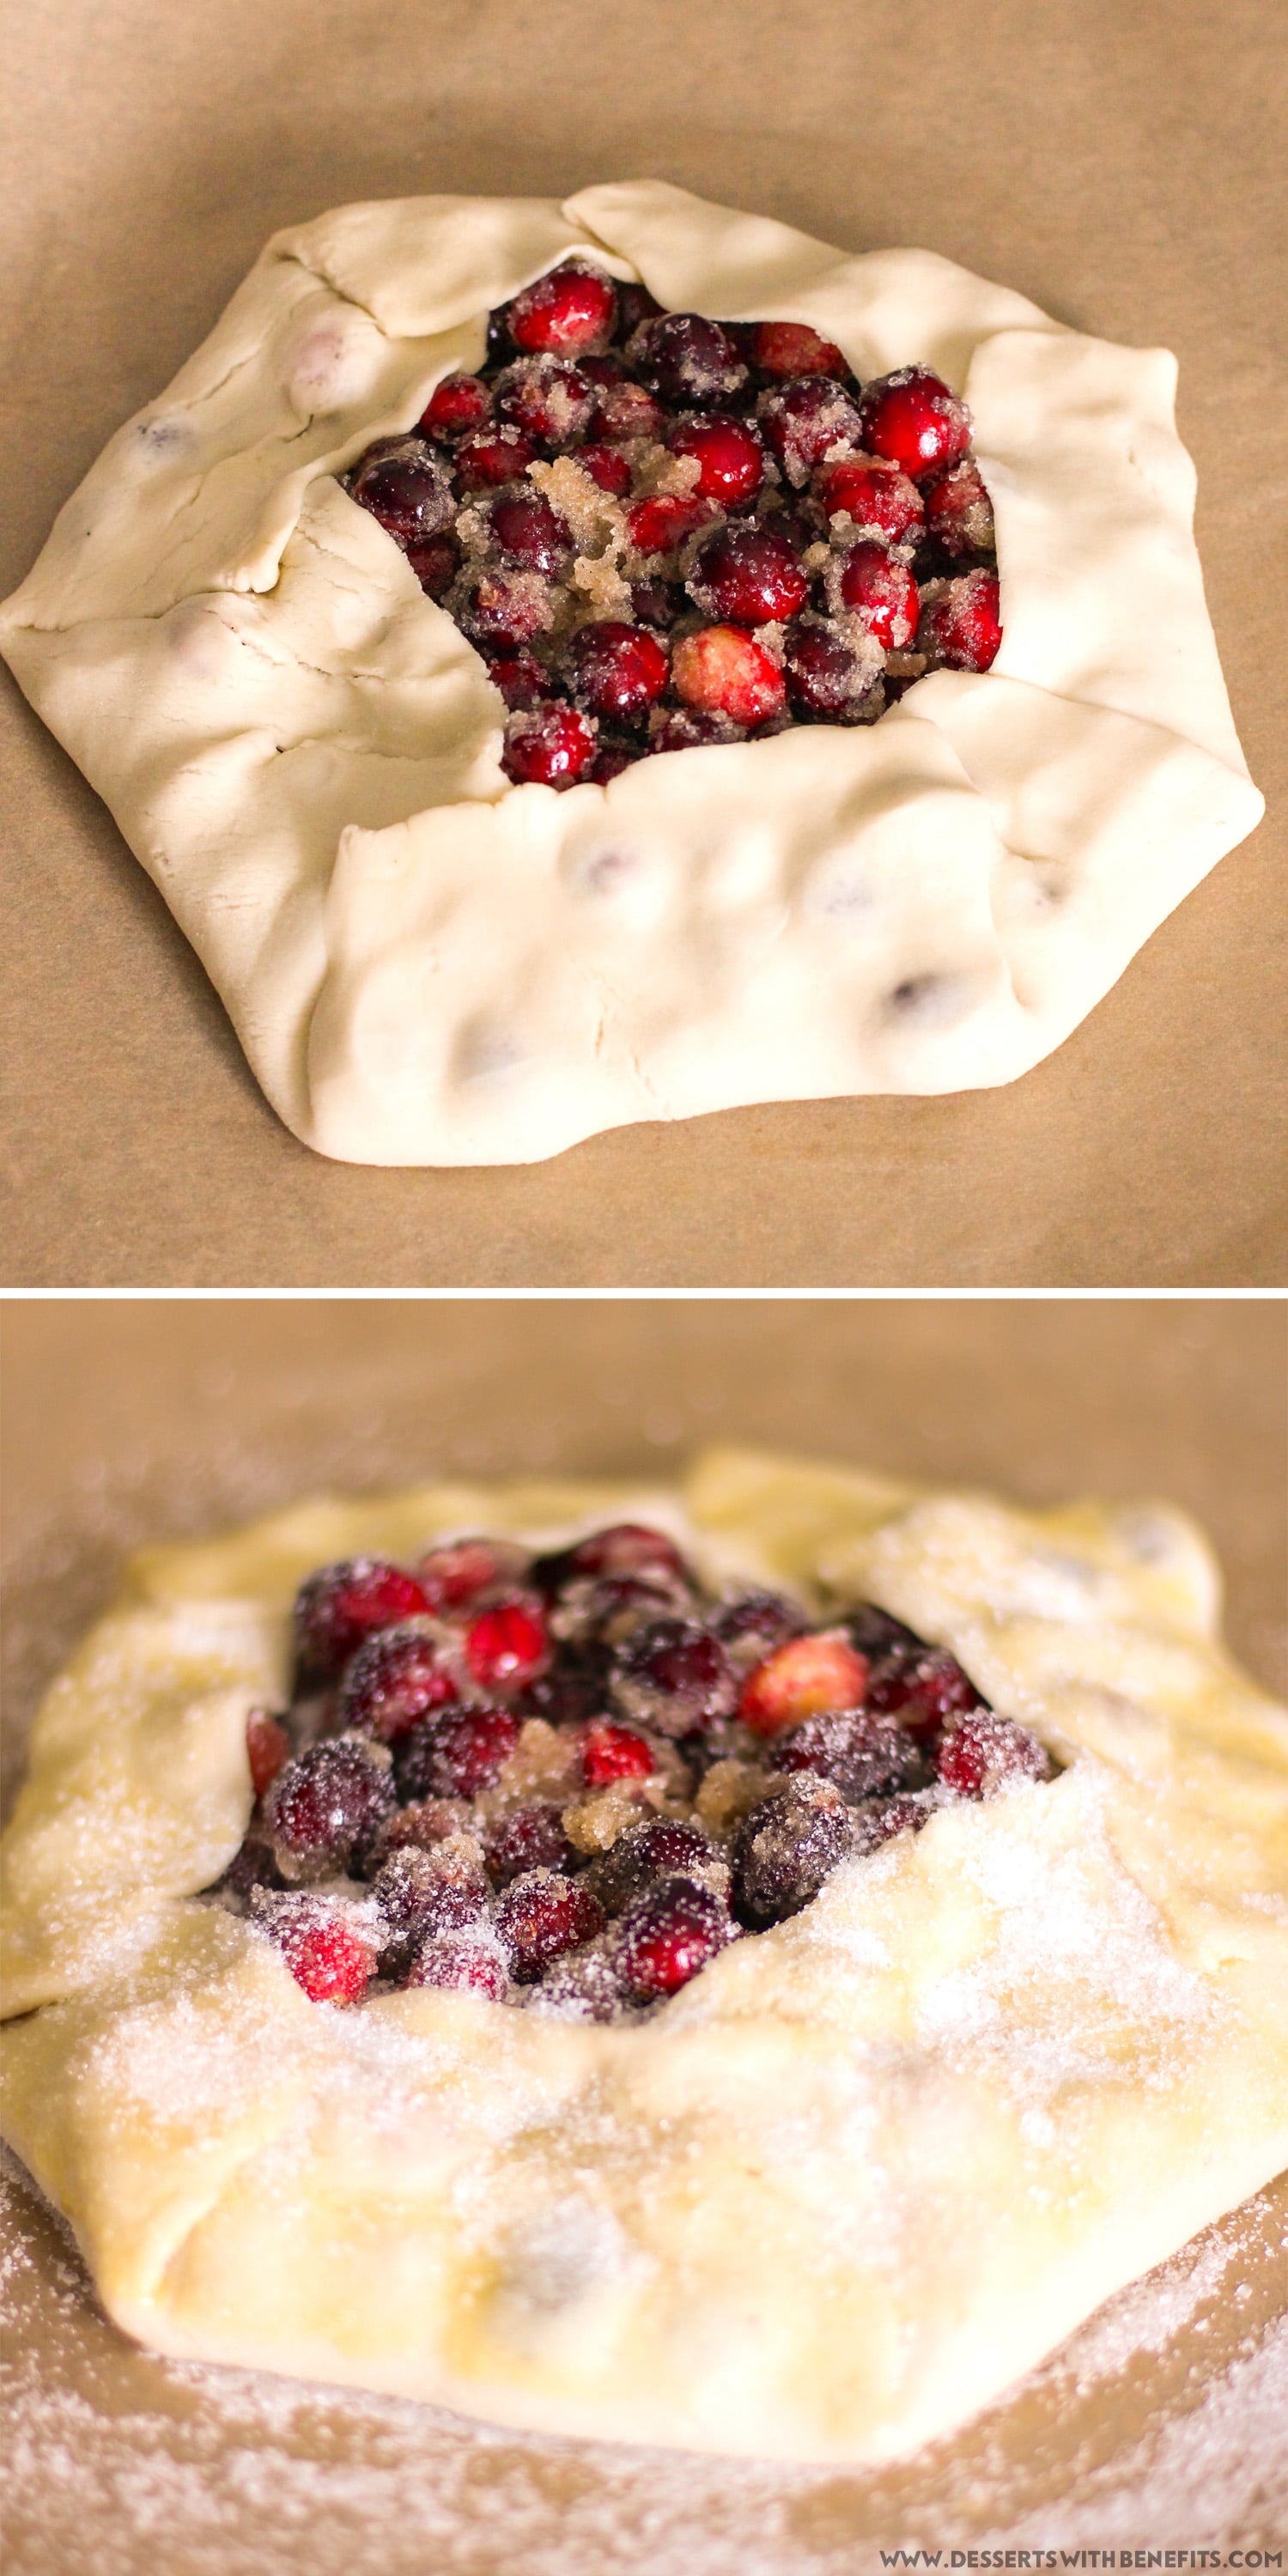 How to Make the World's EASIEST Galette! Quick and Lazy Guilt-Free Cranberry Galette Recipe (low calorie, low fat, low sugar) - Healthy Dessert Recipes at Desserts with Benefits